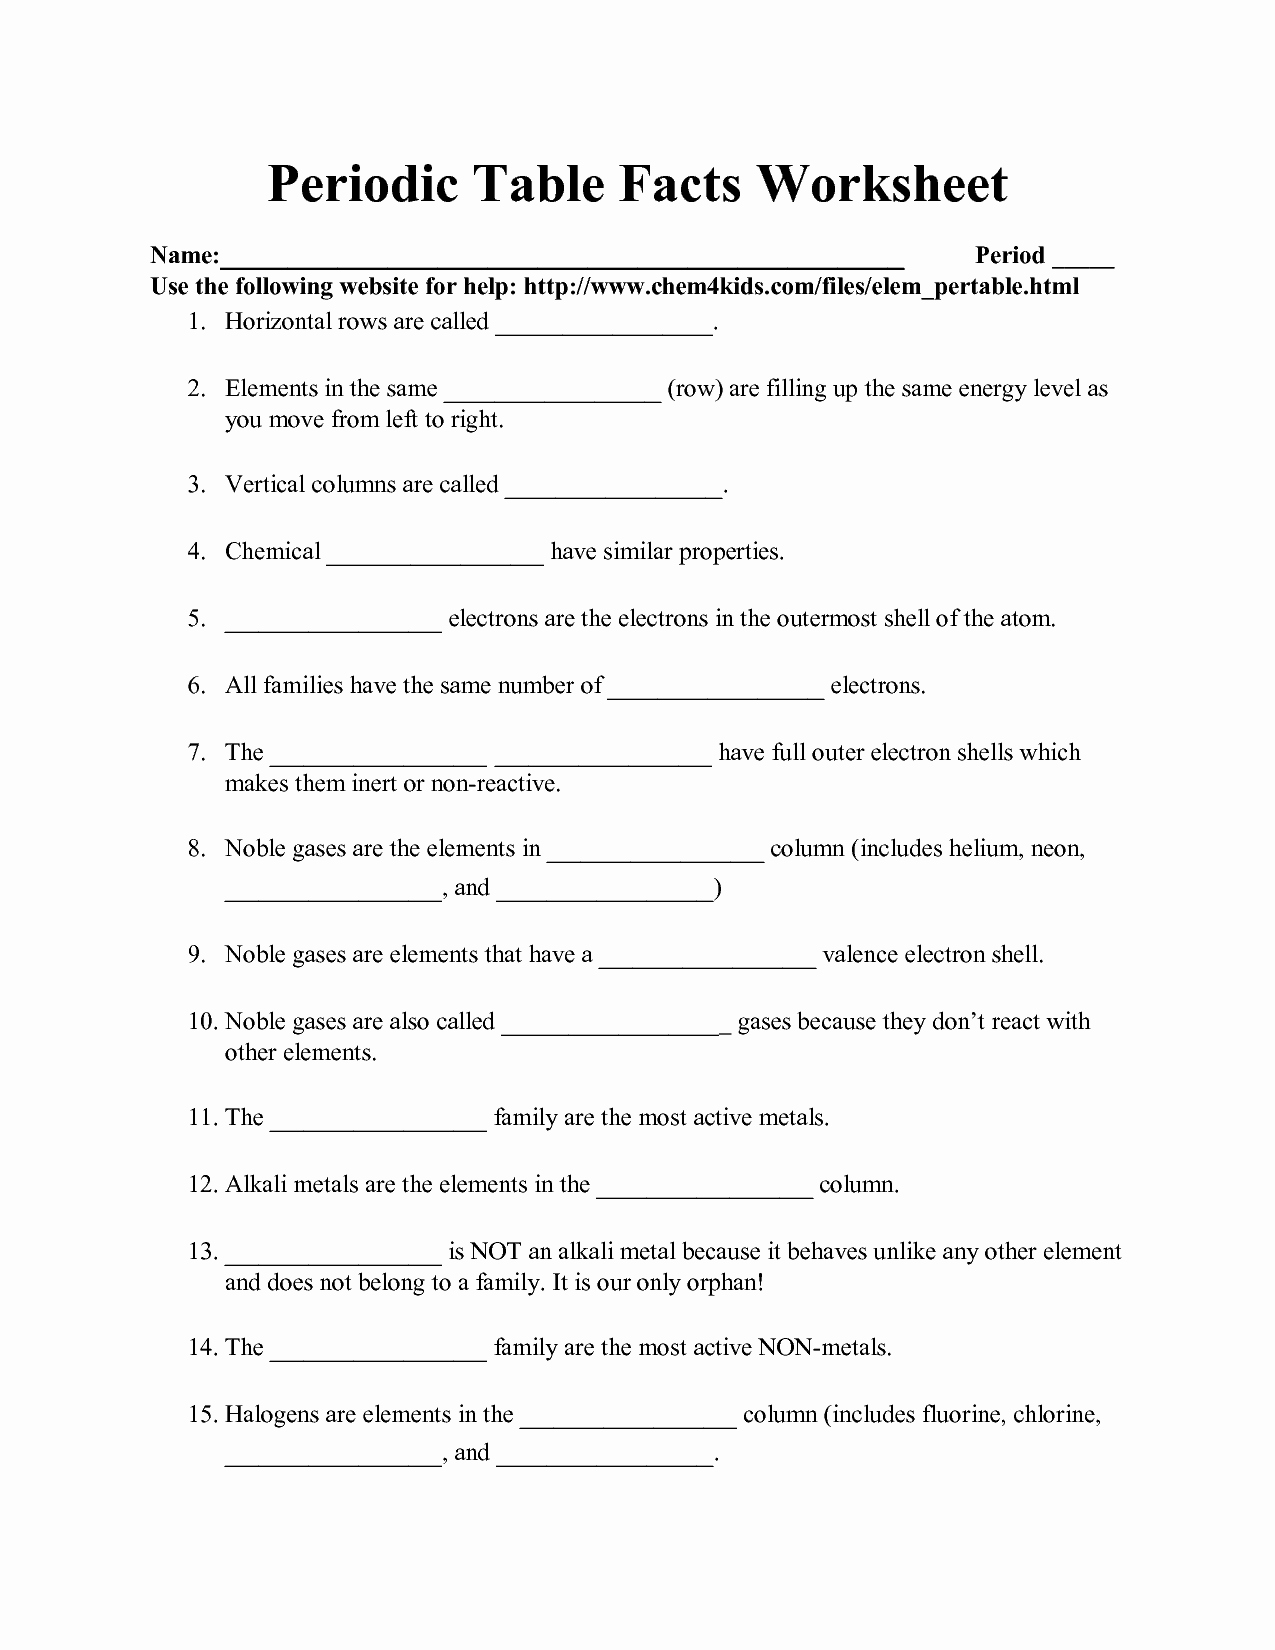 Periodic Table Activity Worksheet New Chemistry Periodic Table Worksheet Answers